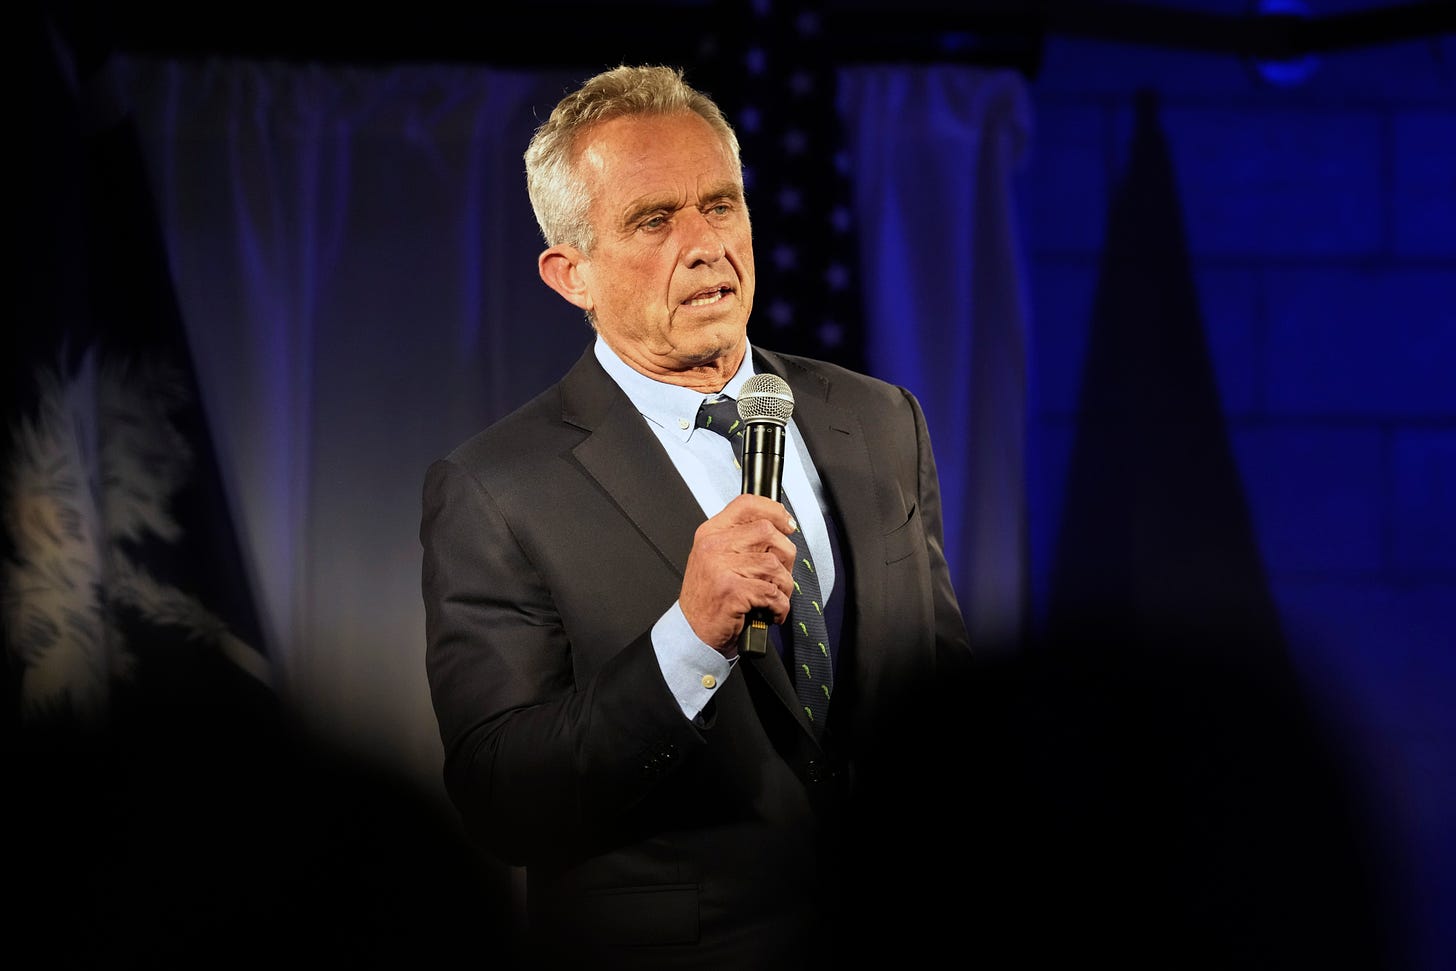 Robert F. Kennedy Jr. holds a mic and speaks during a campaign event.